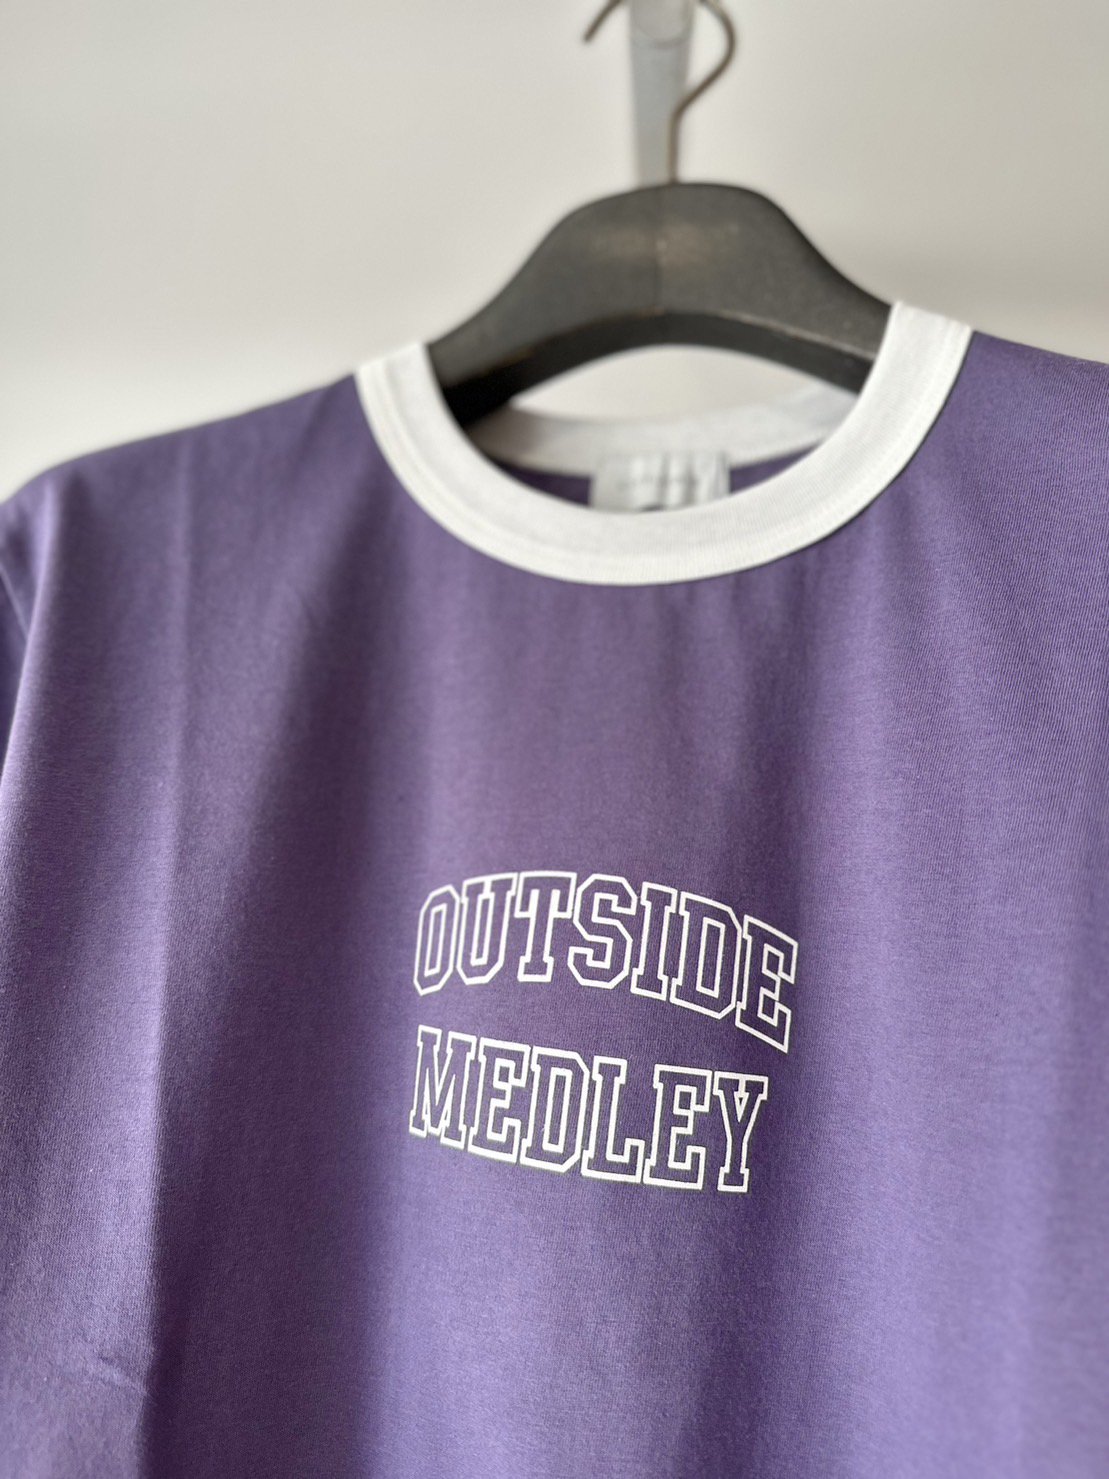 LITTLEBIG<br />OUTSIDE MEDLEY TS / Purple  <img class='new_mark_img2' src='https://img.shop-pro.jp/img/new/icons14.gif' style='border:none;display:inline;margin:0px;padding:0px;width:auto;' />